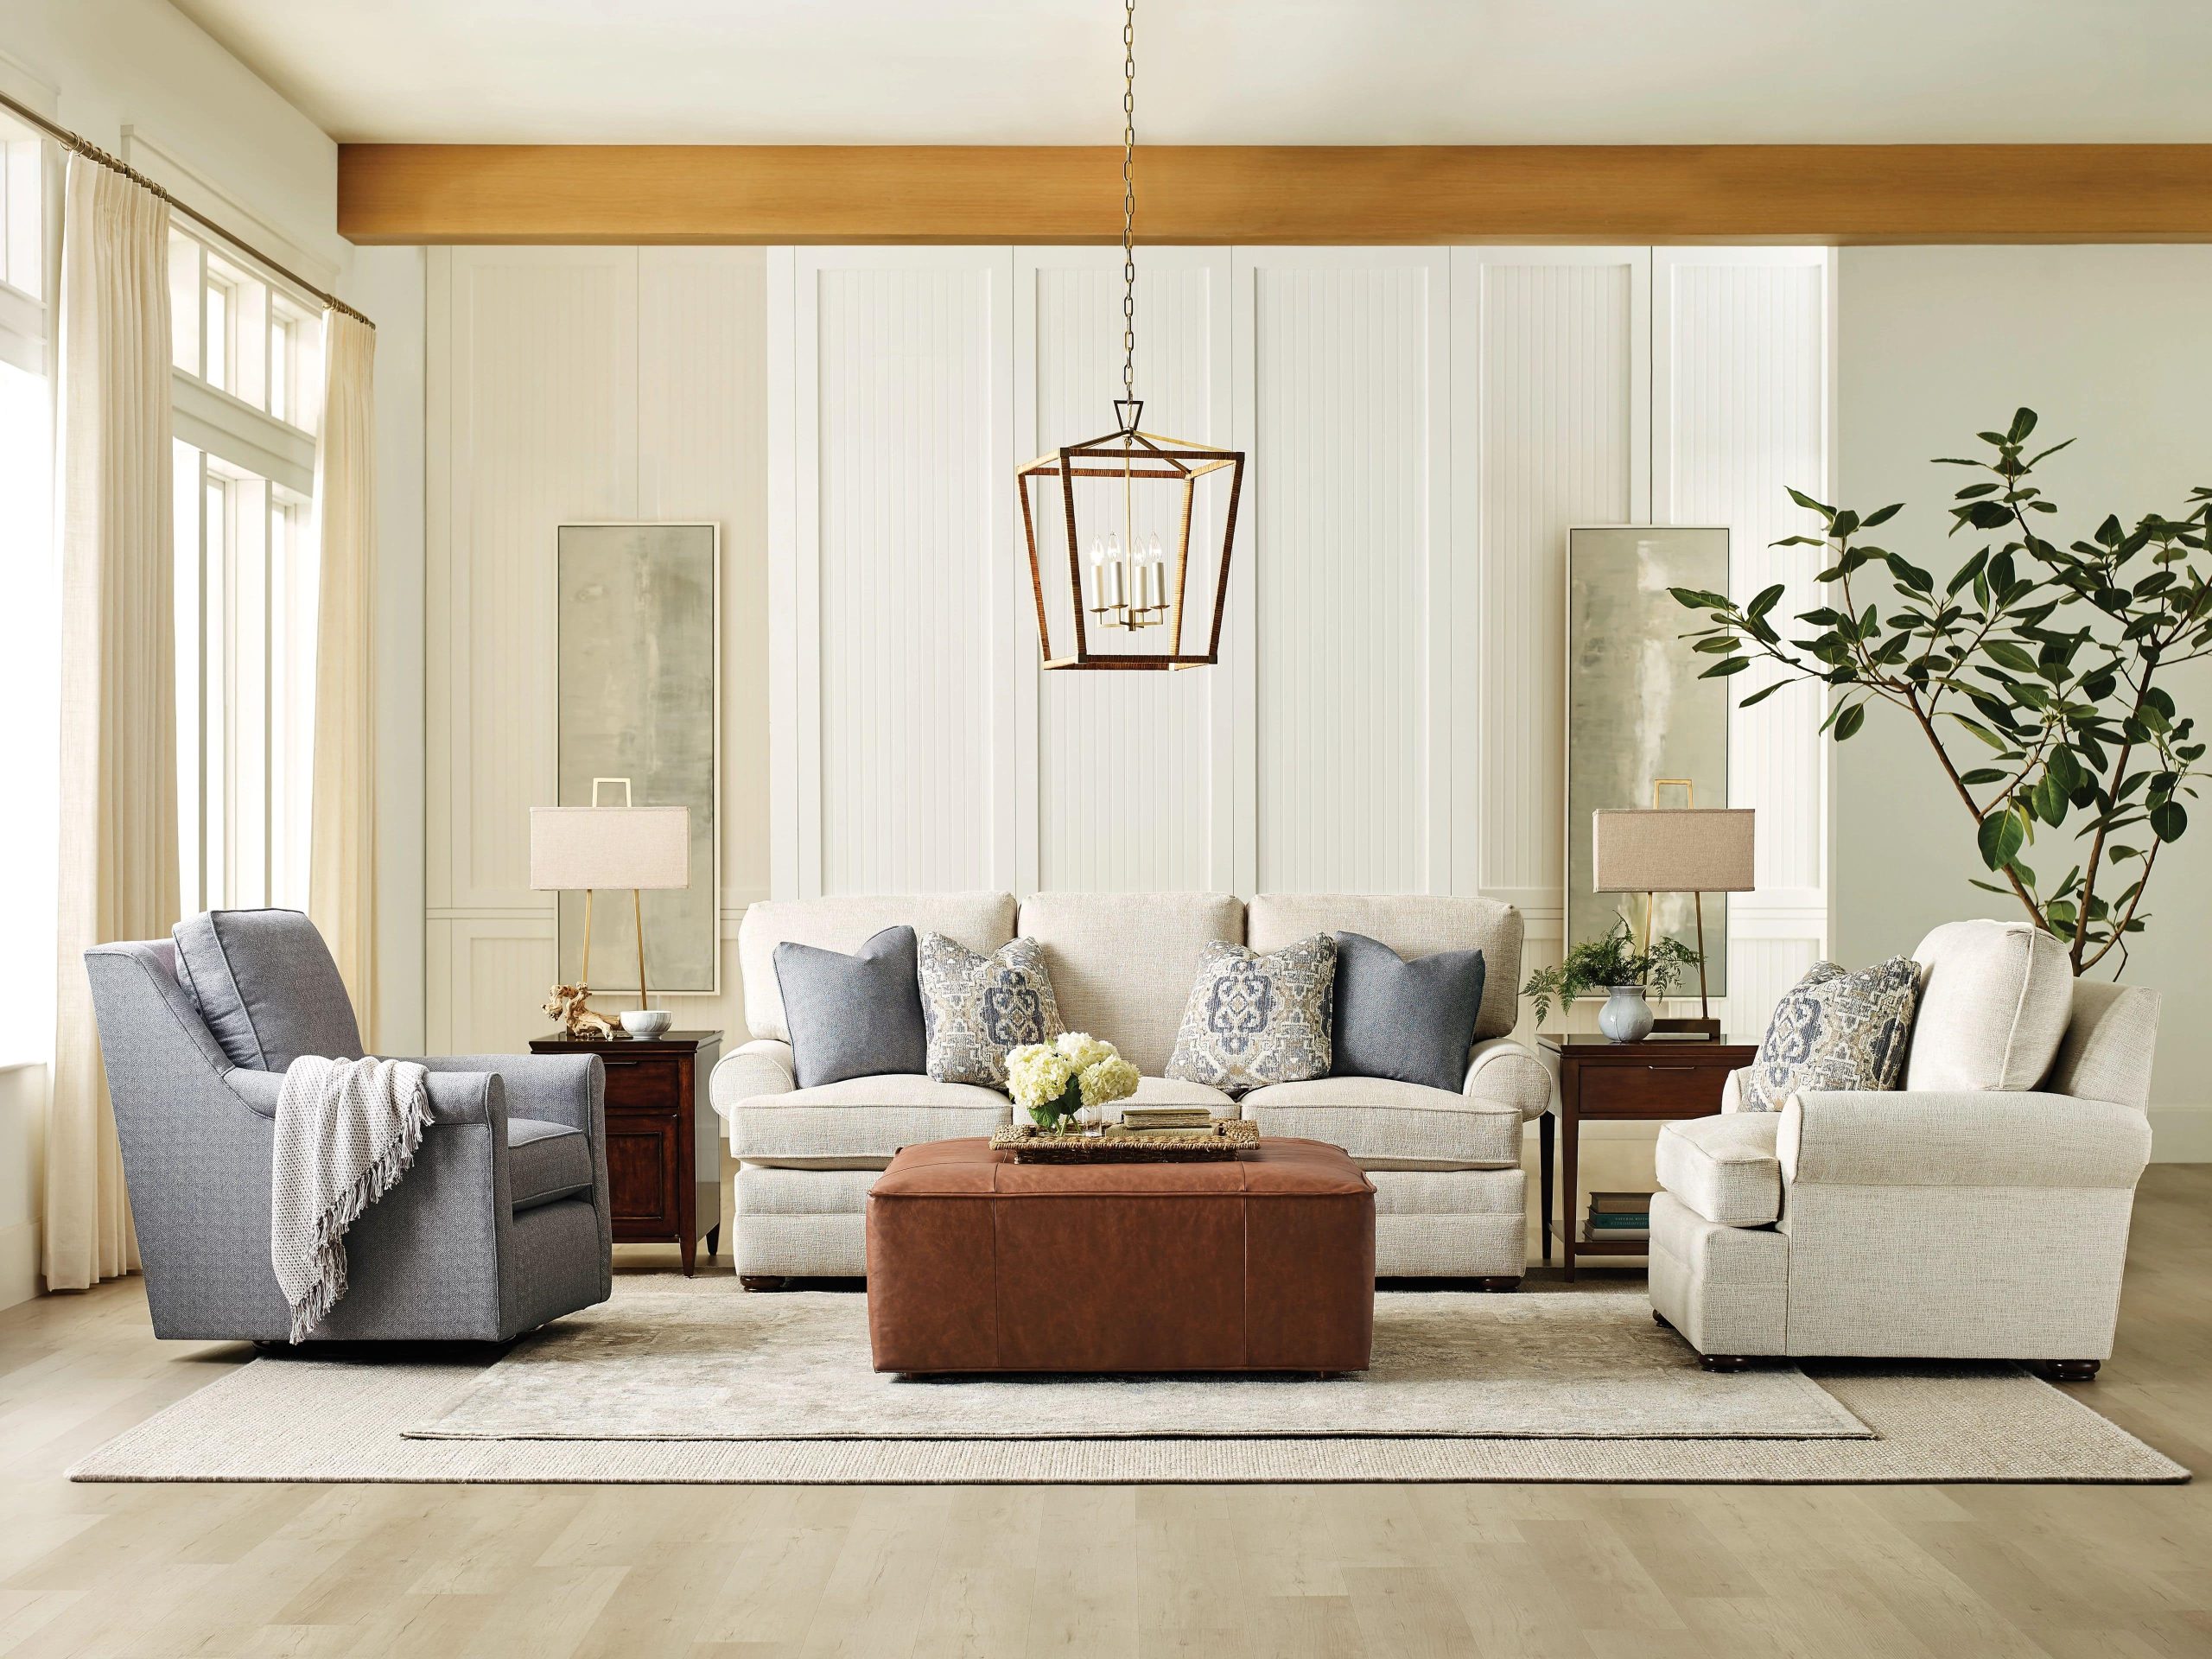 Unique ottomans from EF Brannon are essential for every home.